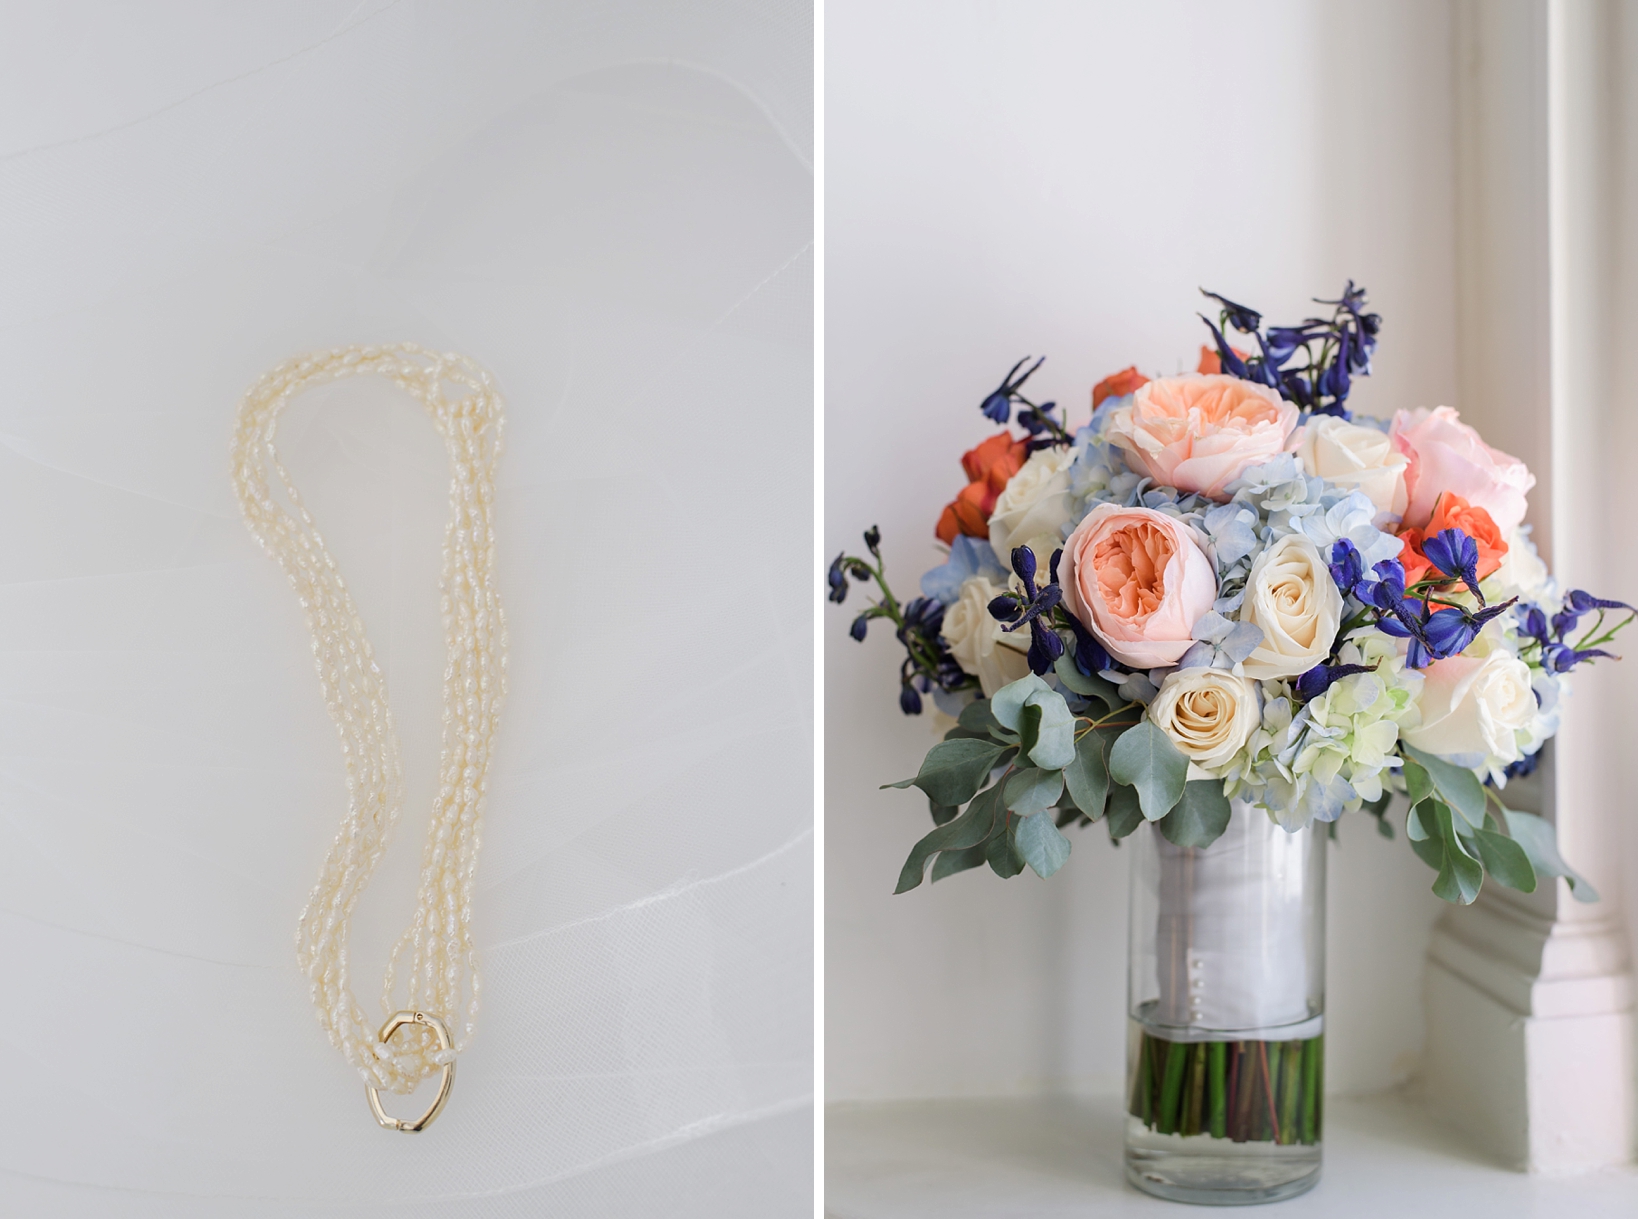 Family jewelry of wedding pearls against the veil and the colorful pops of color of the bridal bouquet